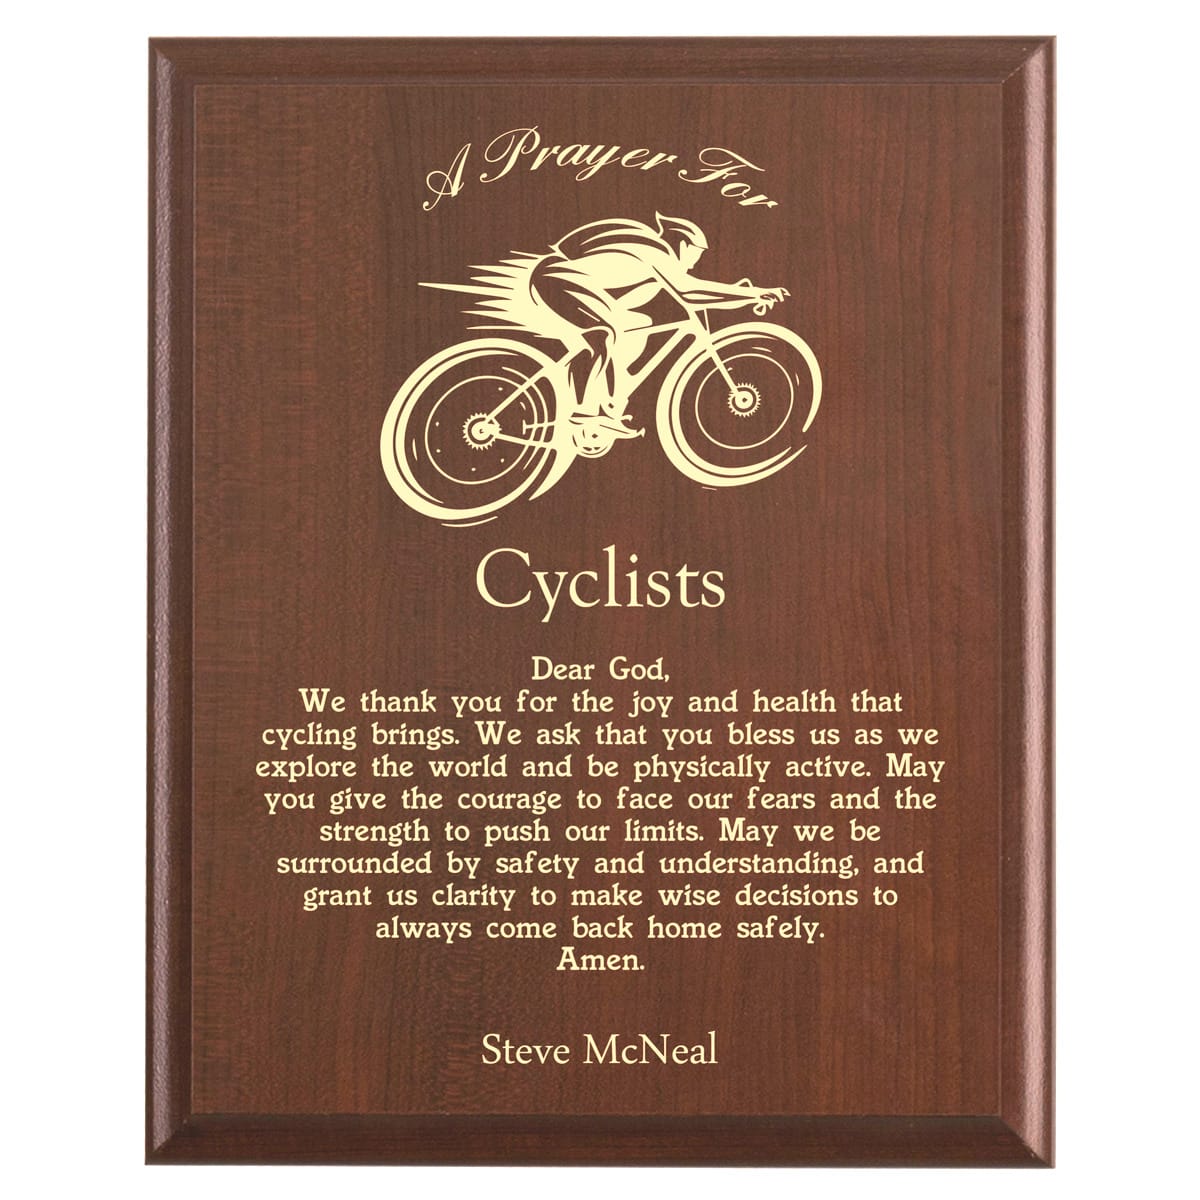 Plaque photo: Cyclist Prayer Plaque design with free personalization. Wood style finish with customized text.